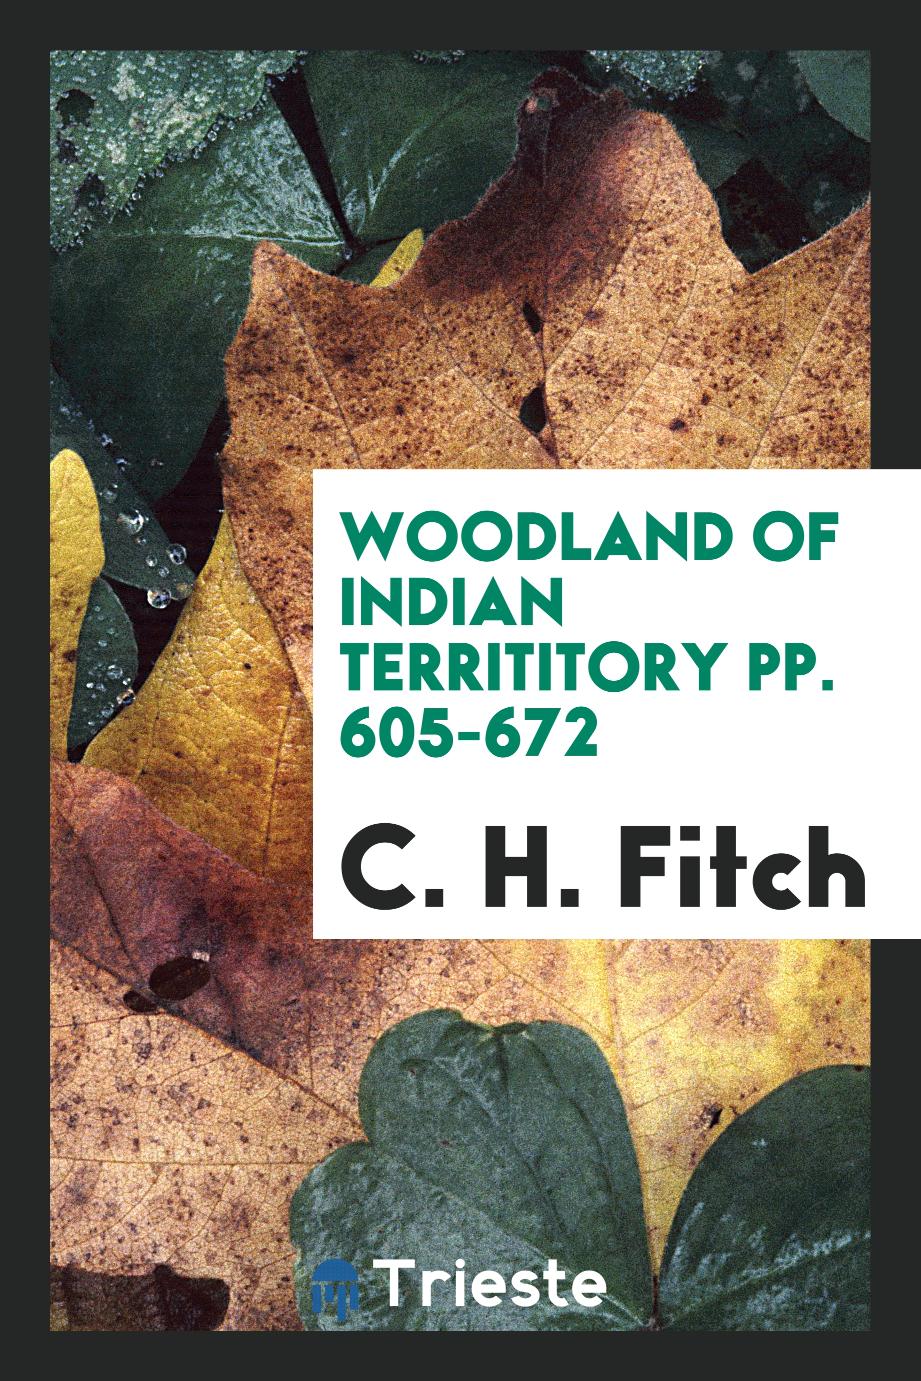 Woodland of Indian Territitory pp. 605-672